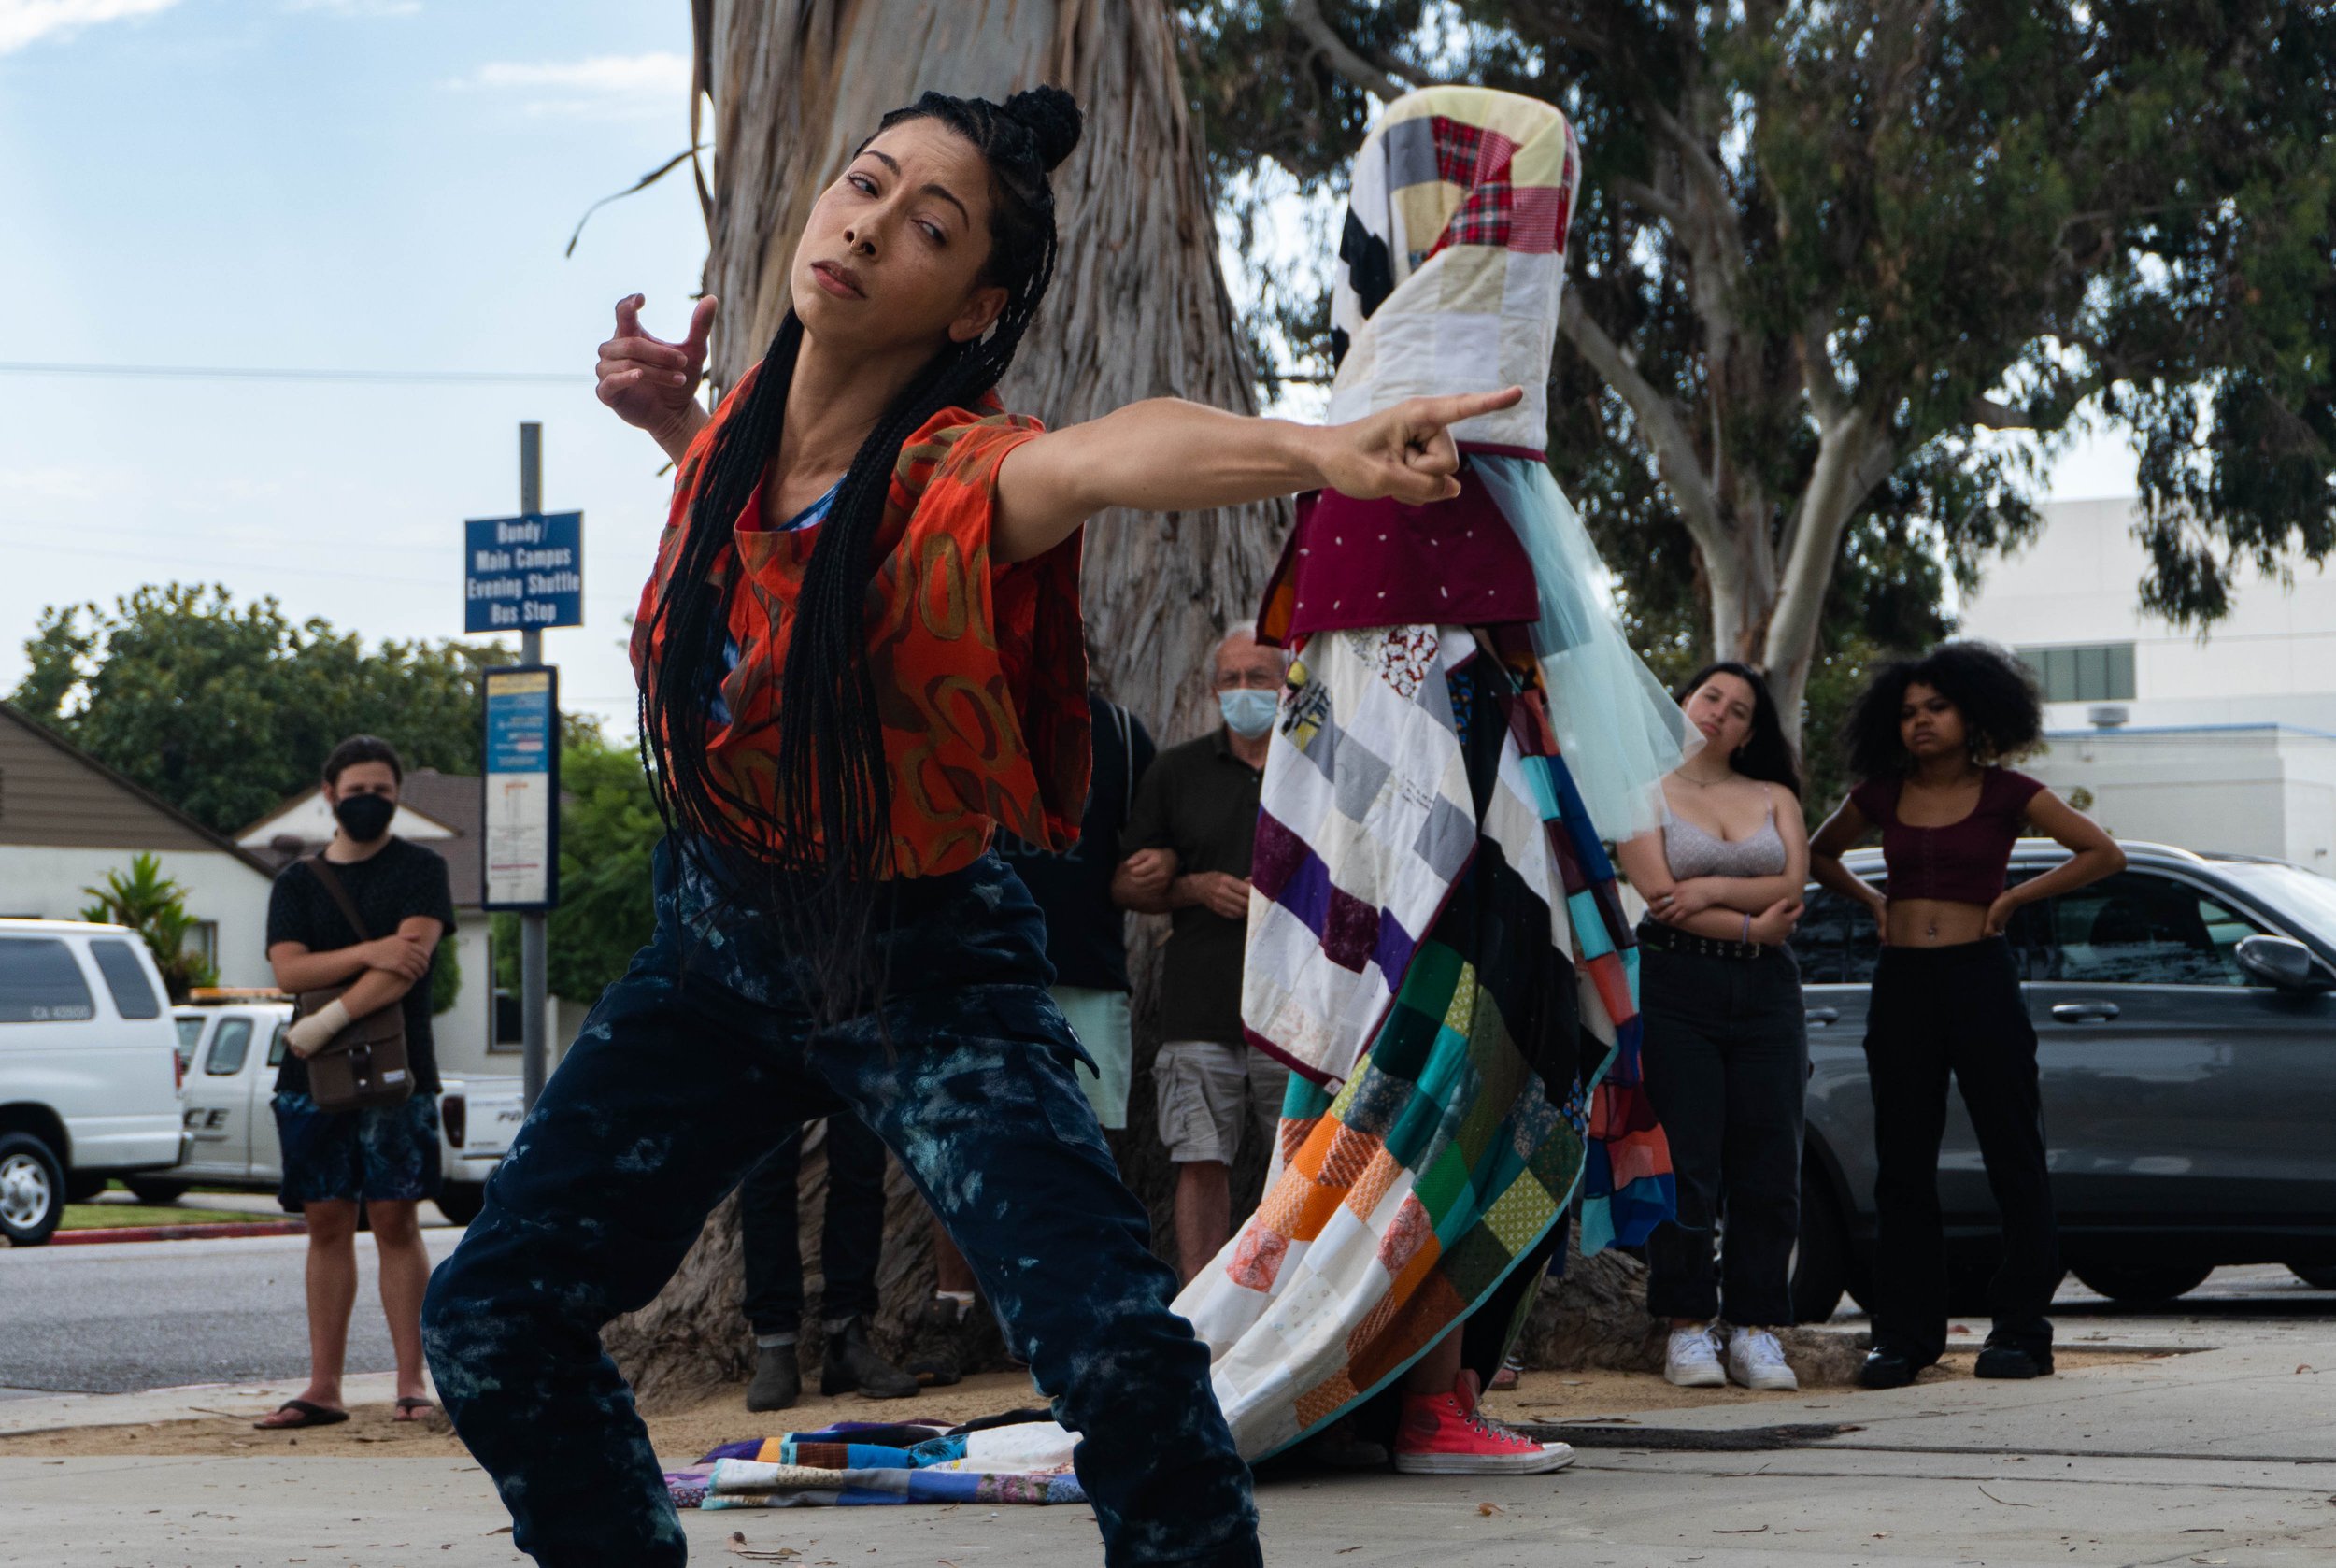  Stacey Lynn Smith, Catalyst performer performs the second part of 'Being Future Being: Land/Celestial' with an interpretative dance as performance partner, Jasmine Shorty circles the Blue Gum tree draped in colorful handmade quilts. Smith's boyfrien